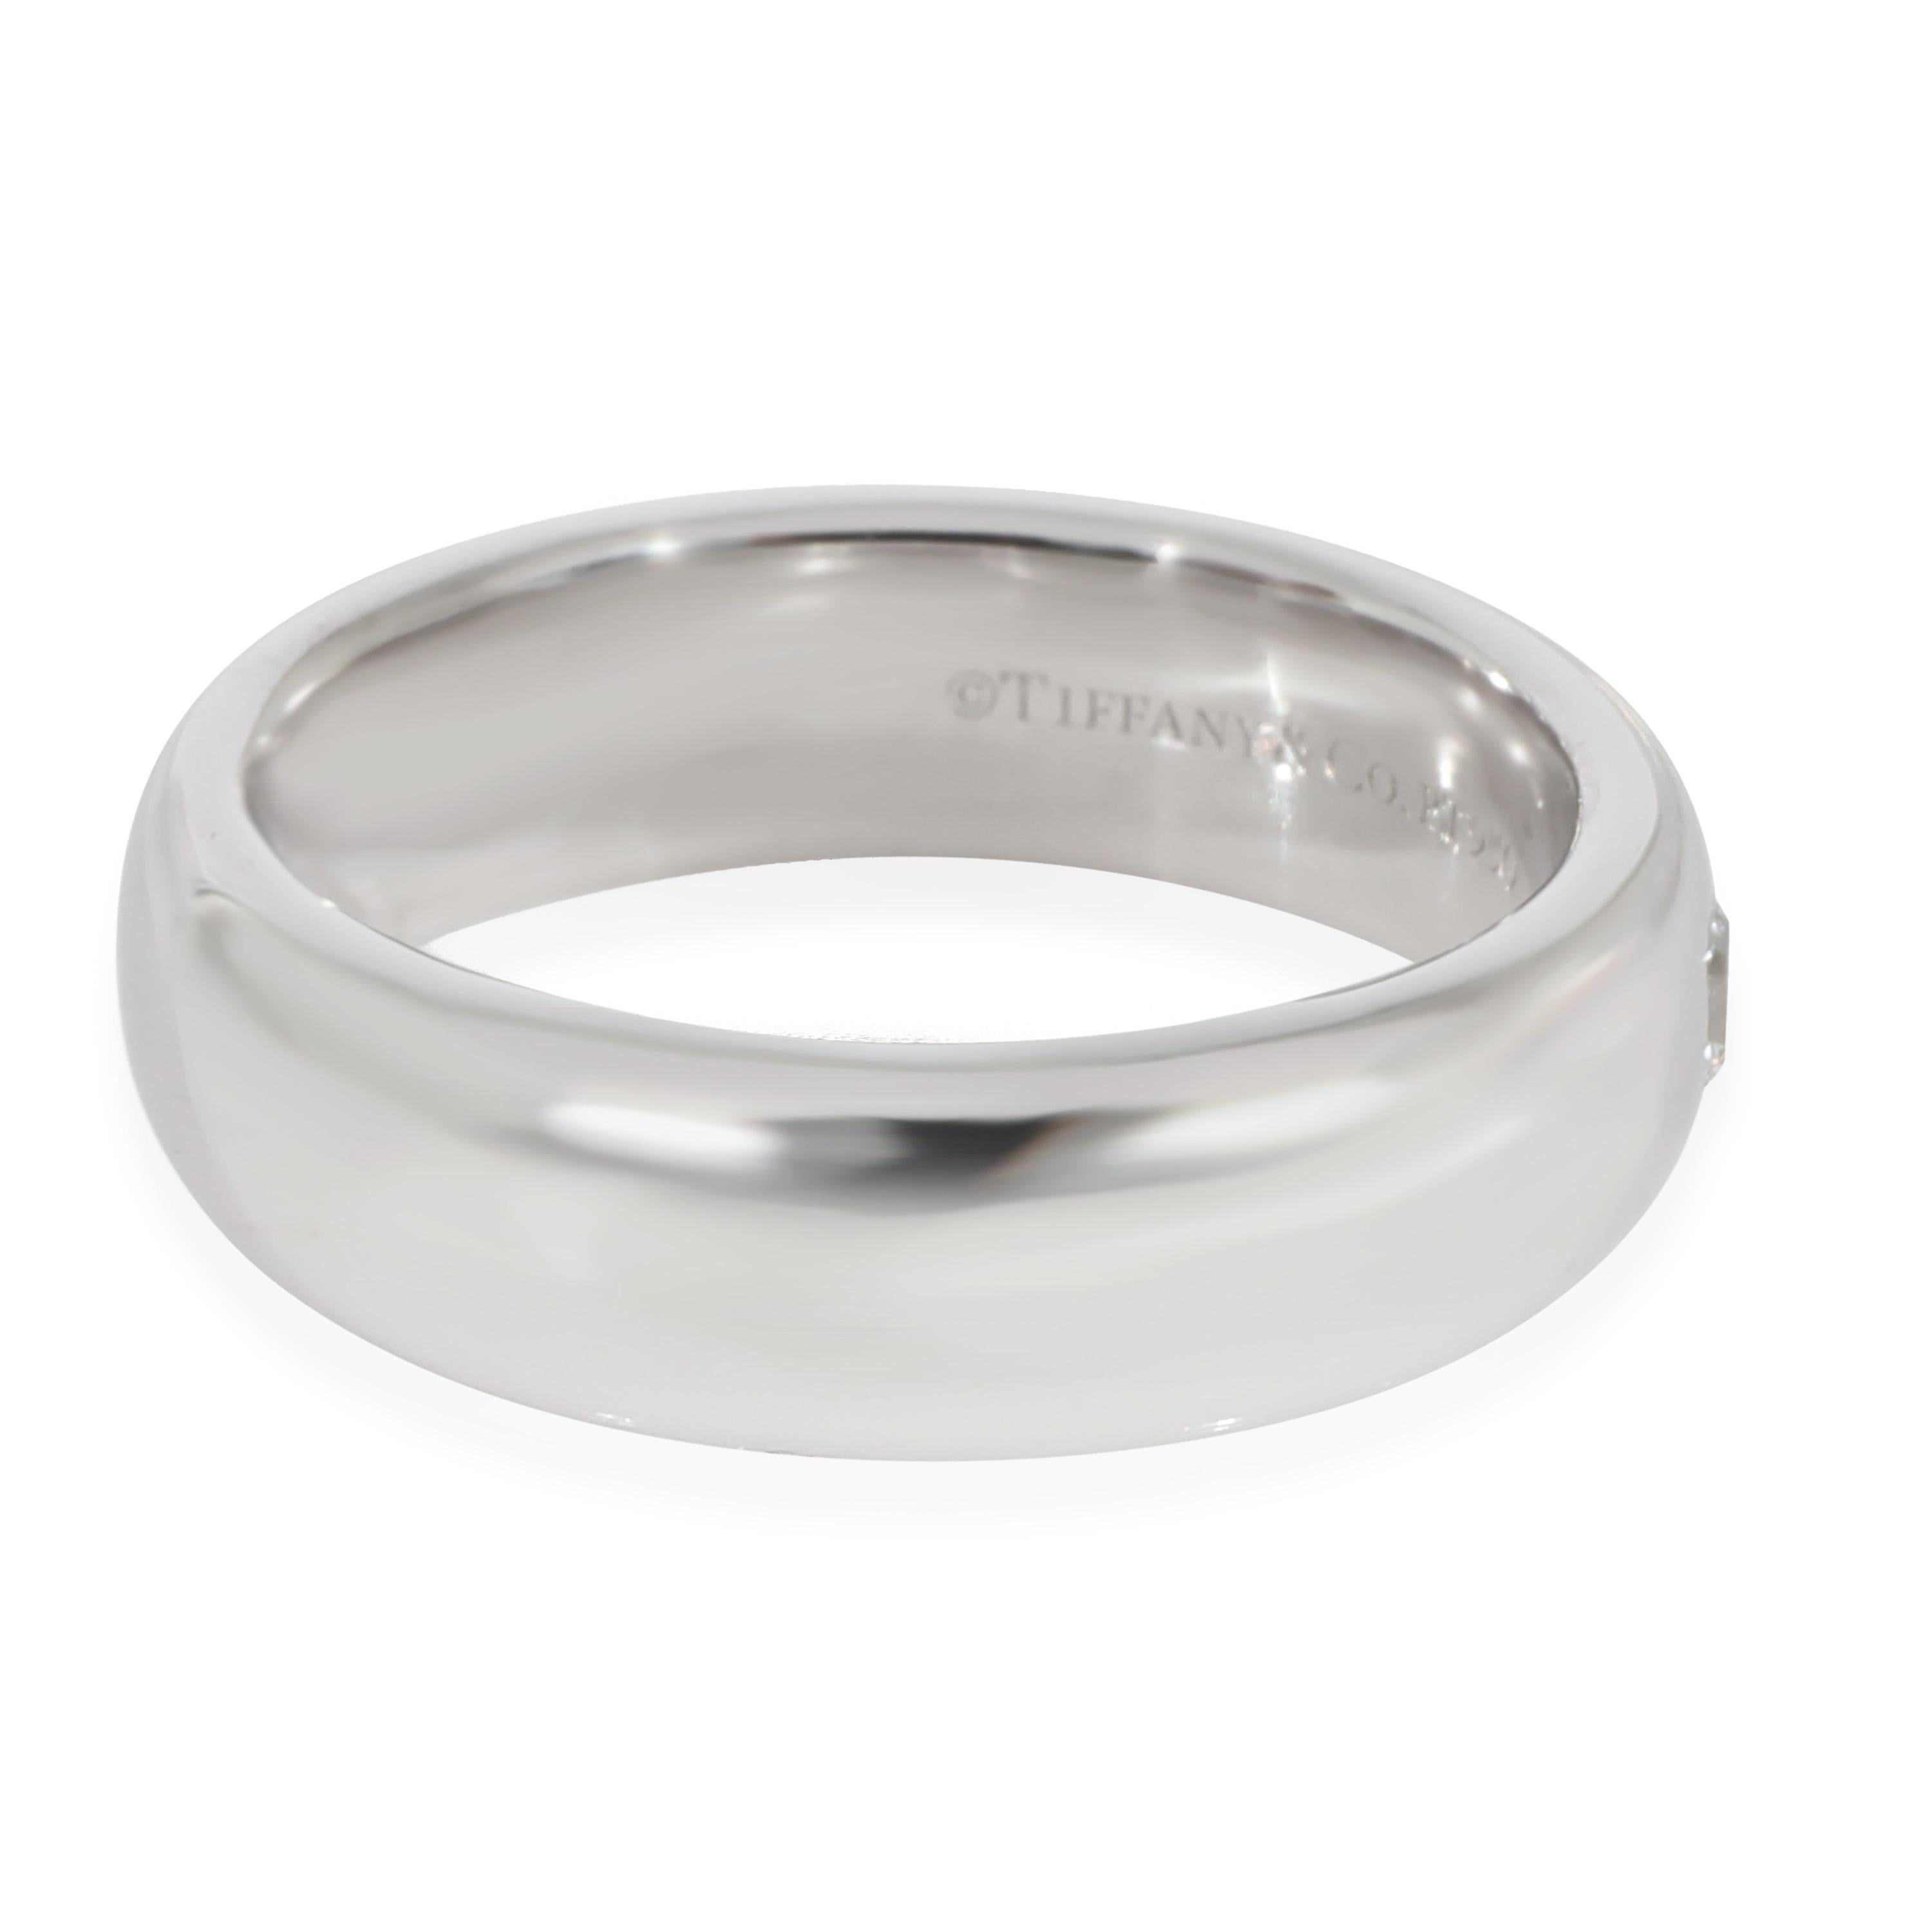 Tiffany & Co. Lucida Diamond Wedding Band in Platinum 0.11 CTW In Excellent Condition For Sale In New York, NY